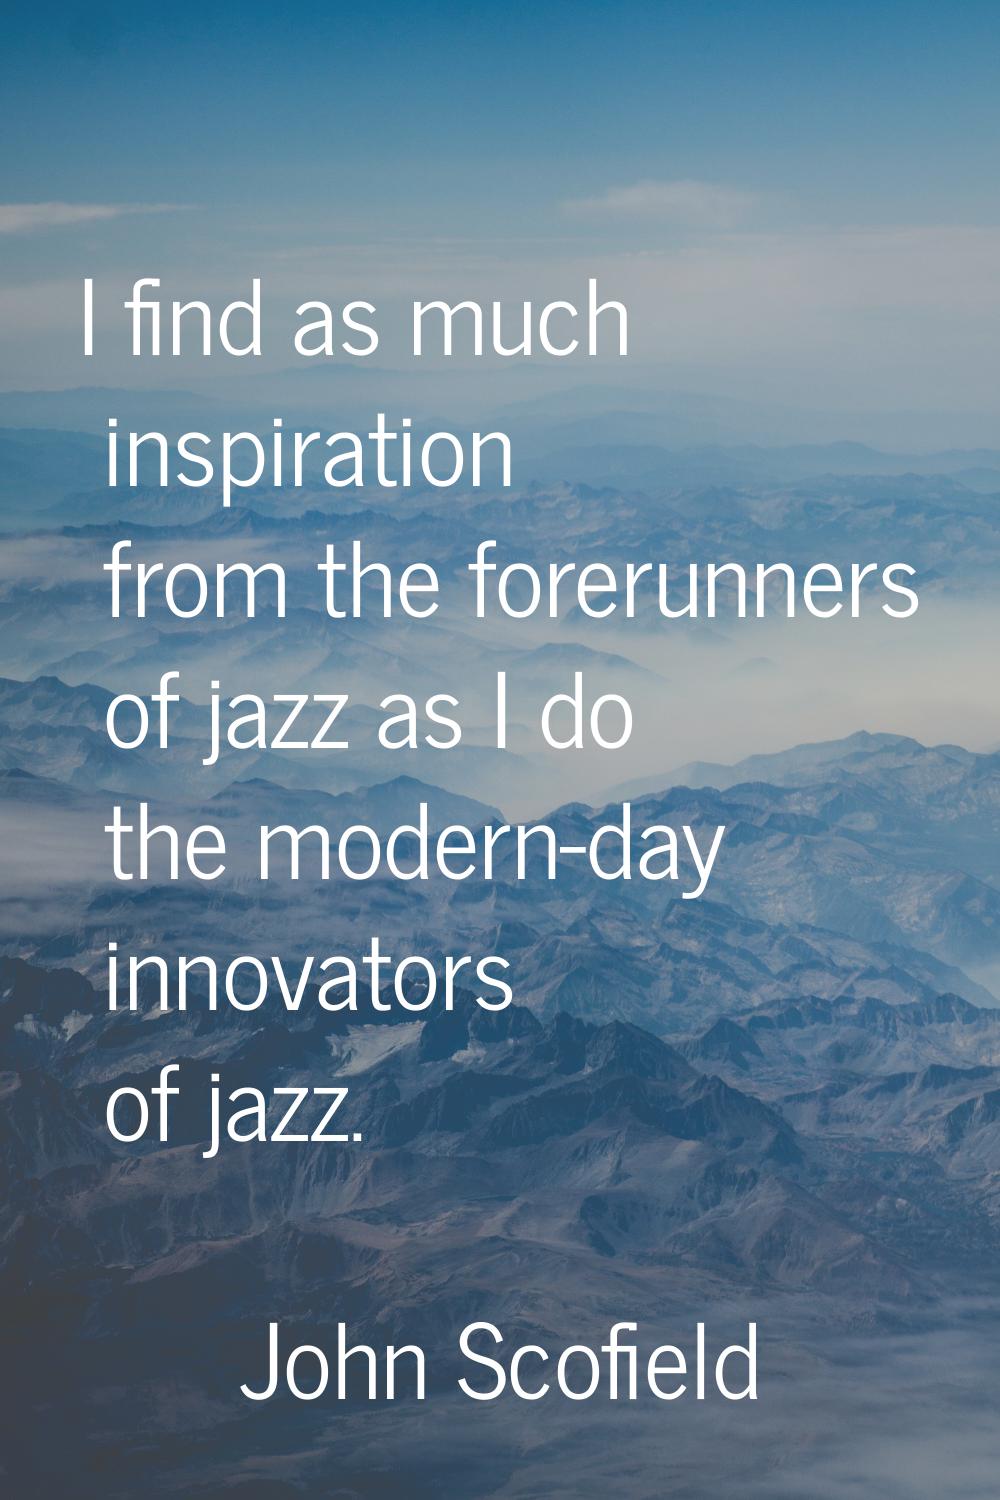 I find as much inspiration from the forerunners of jazz as I do the modern-day innovators of jazz.